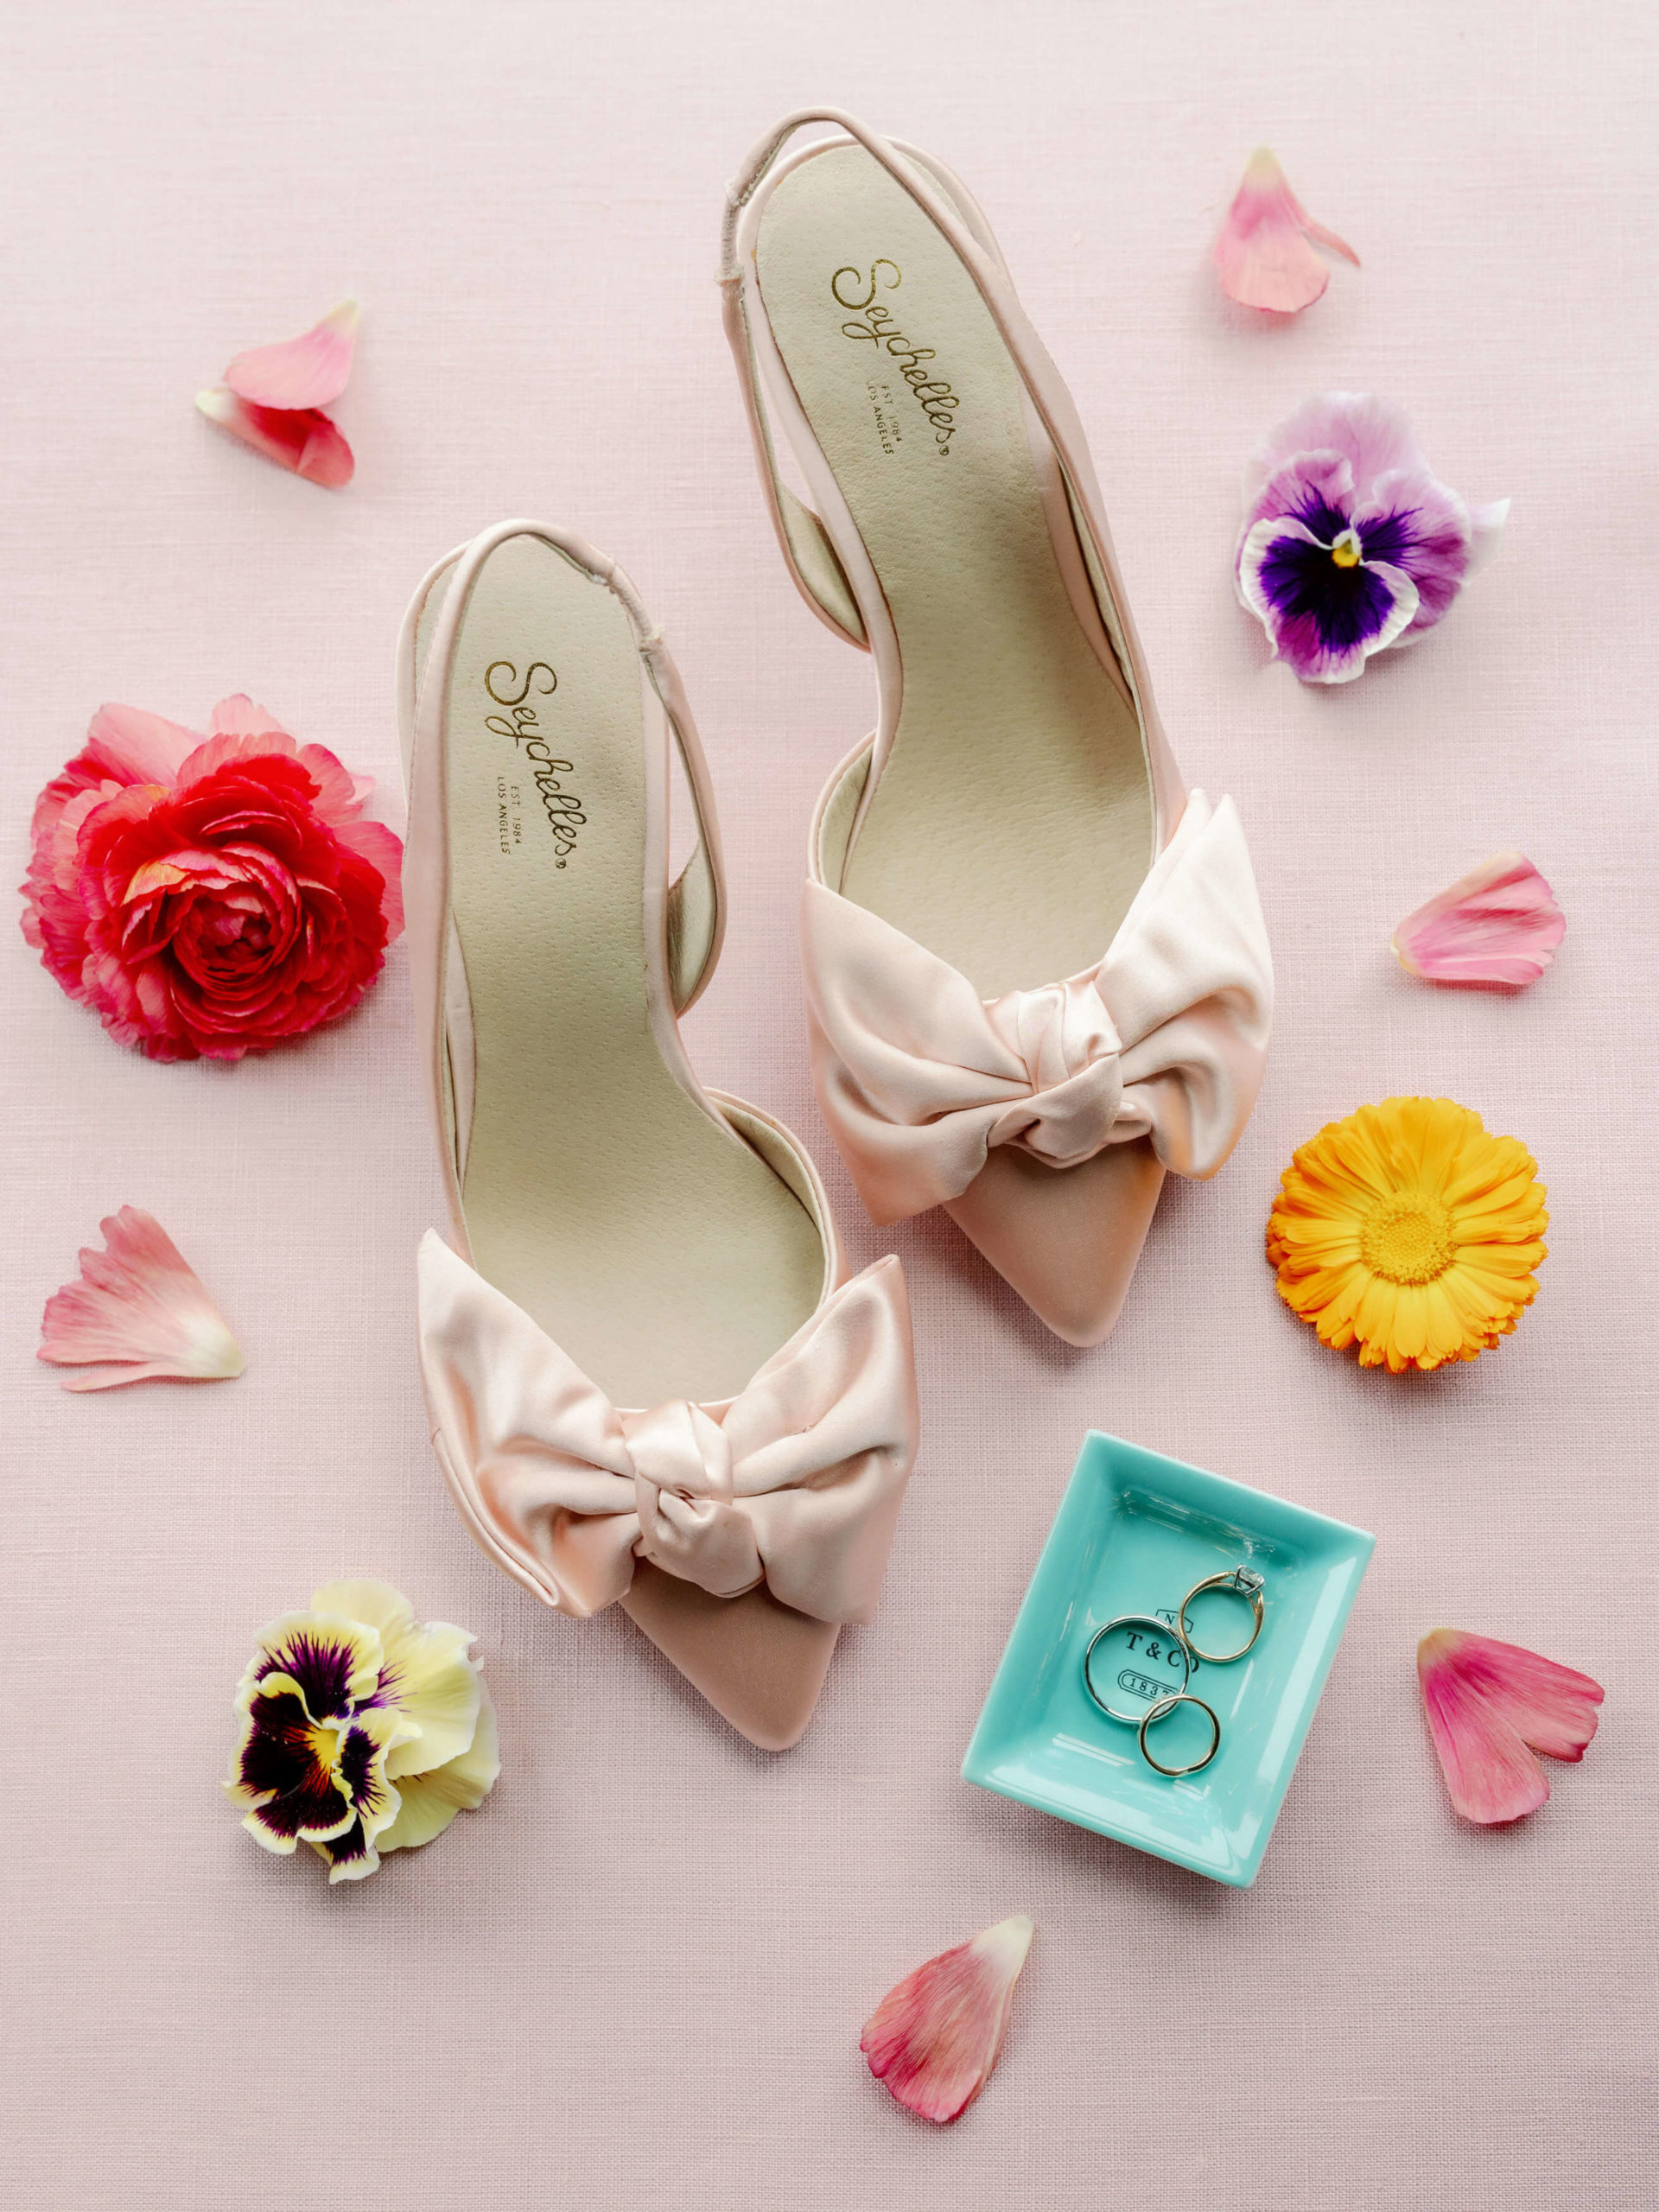 Wedding shoes, engagement ring and wedding bands for a wedding in NYC. Editorial wedding image by Jenny Fu Studio.